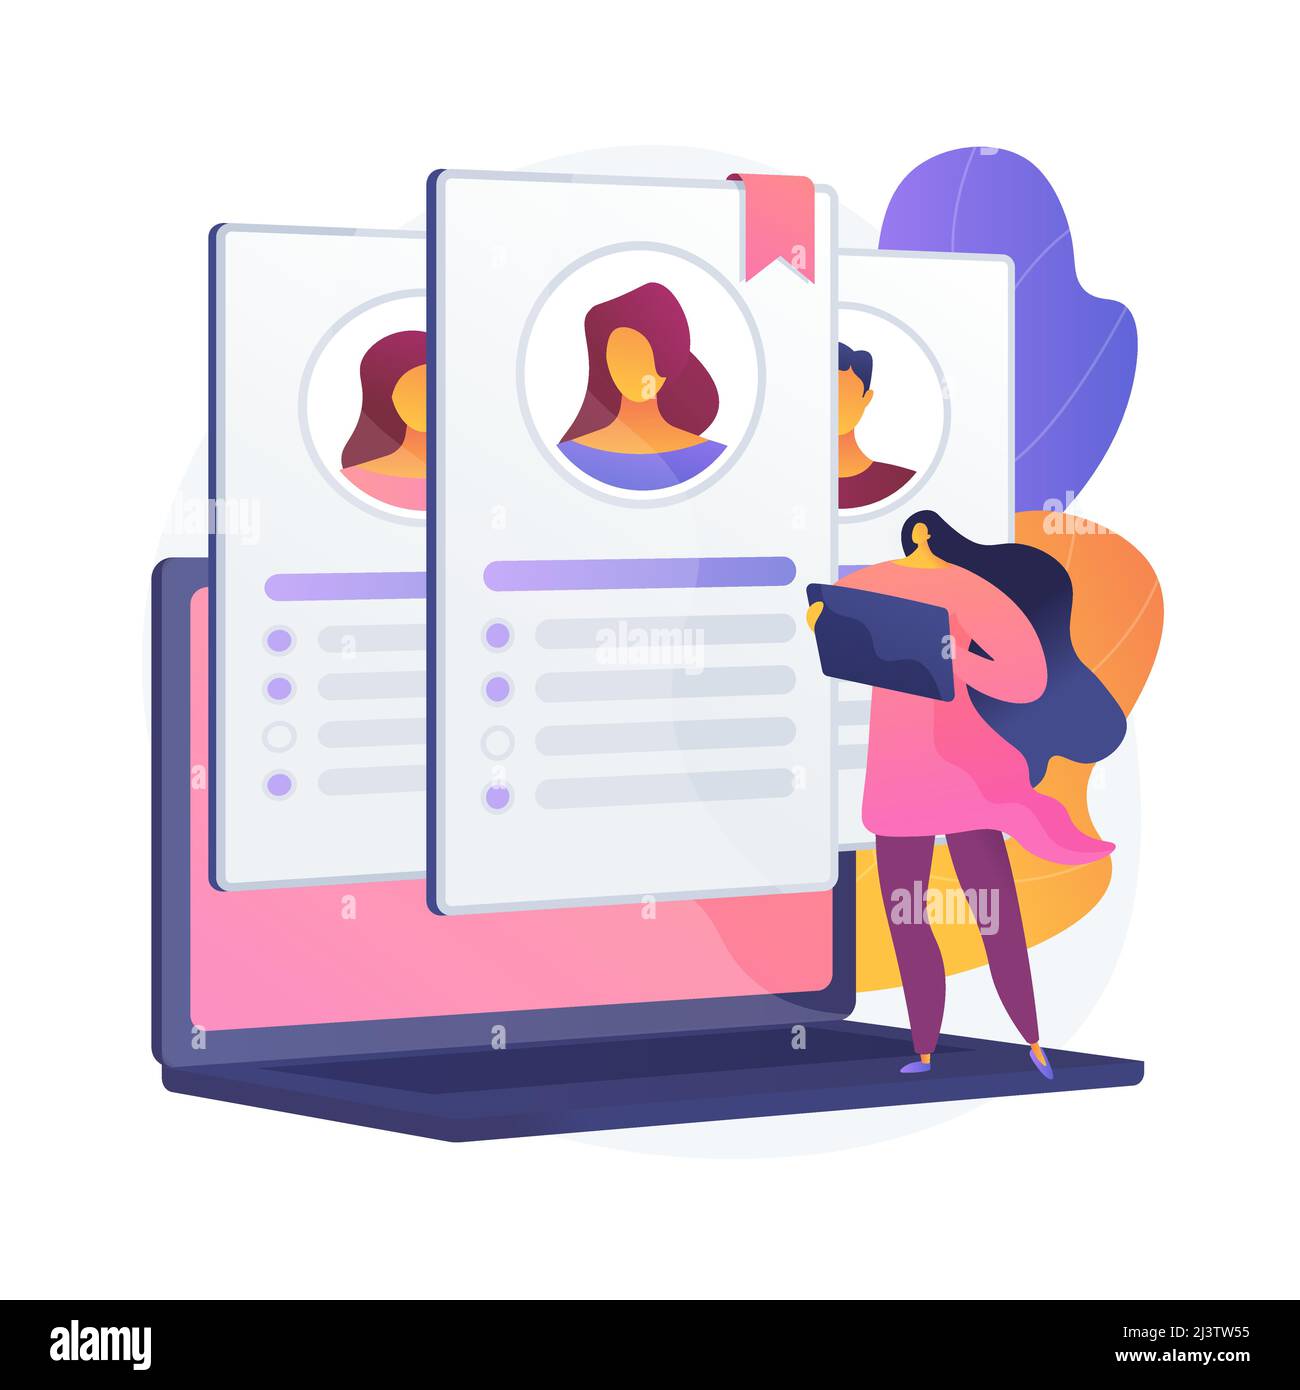 Human resource management. Job analysis, sourcing, screening and selection. Female cartoon character reading job applications and CV of candidatees. V Stock Vector